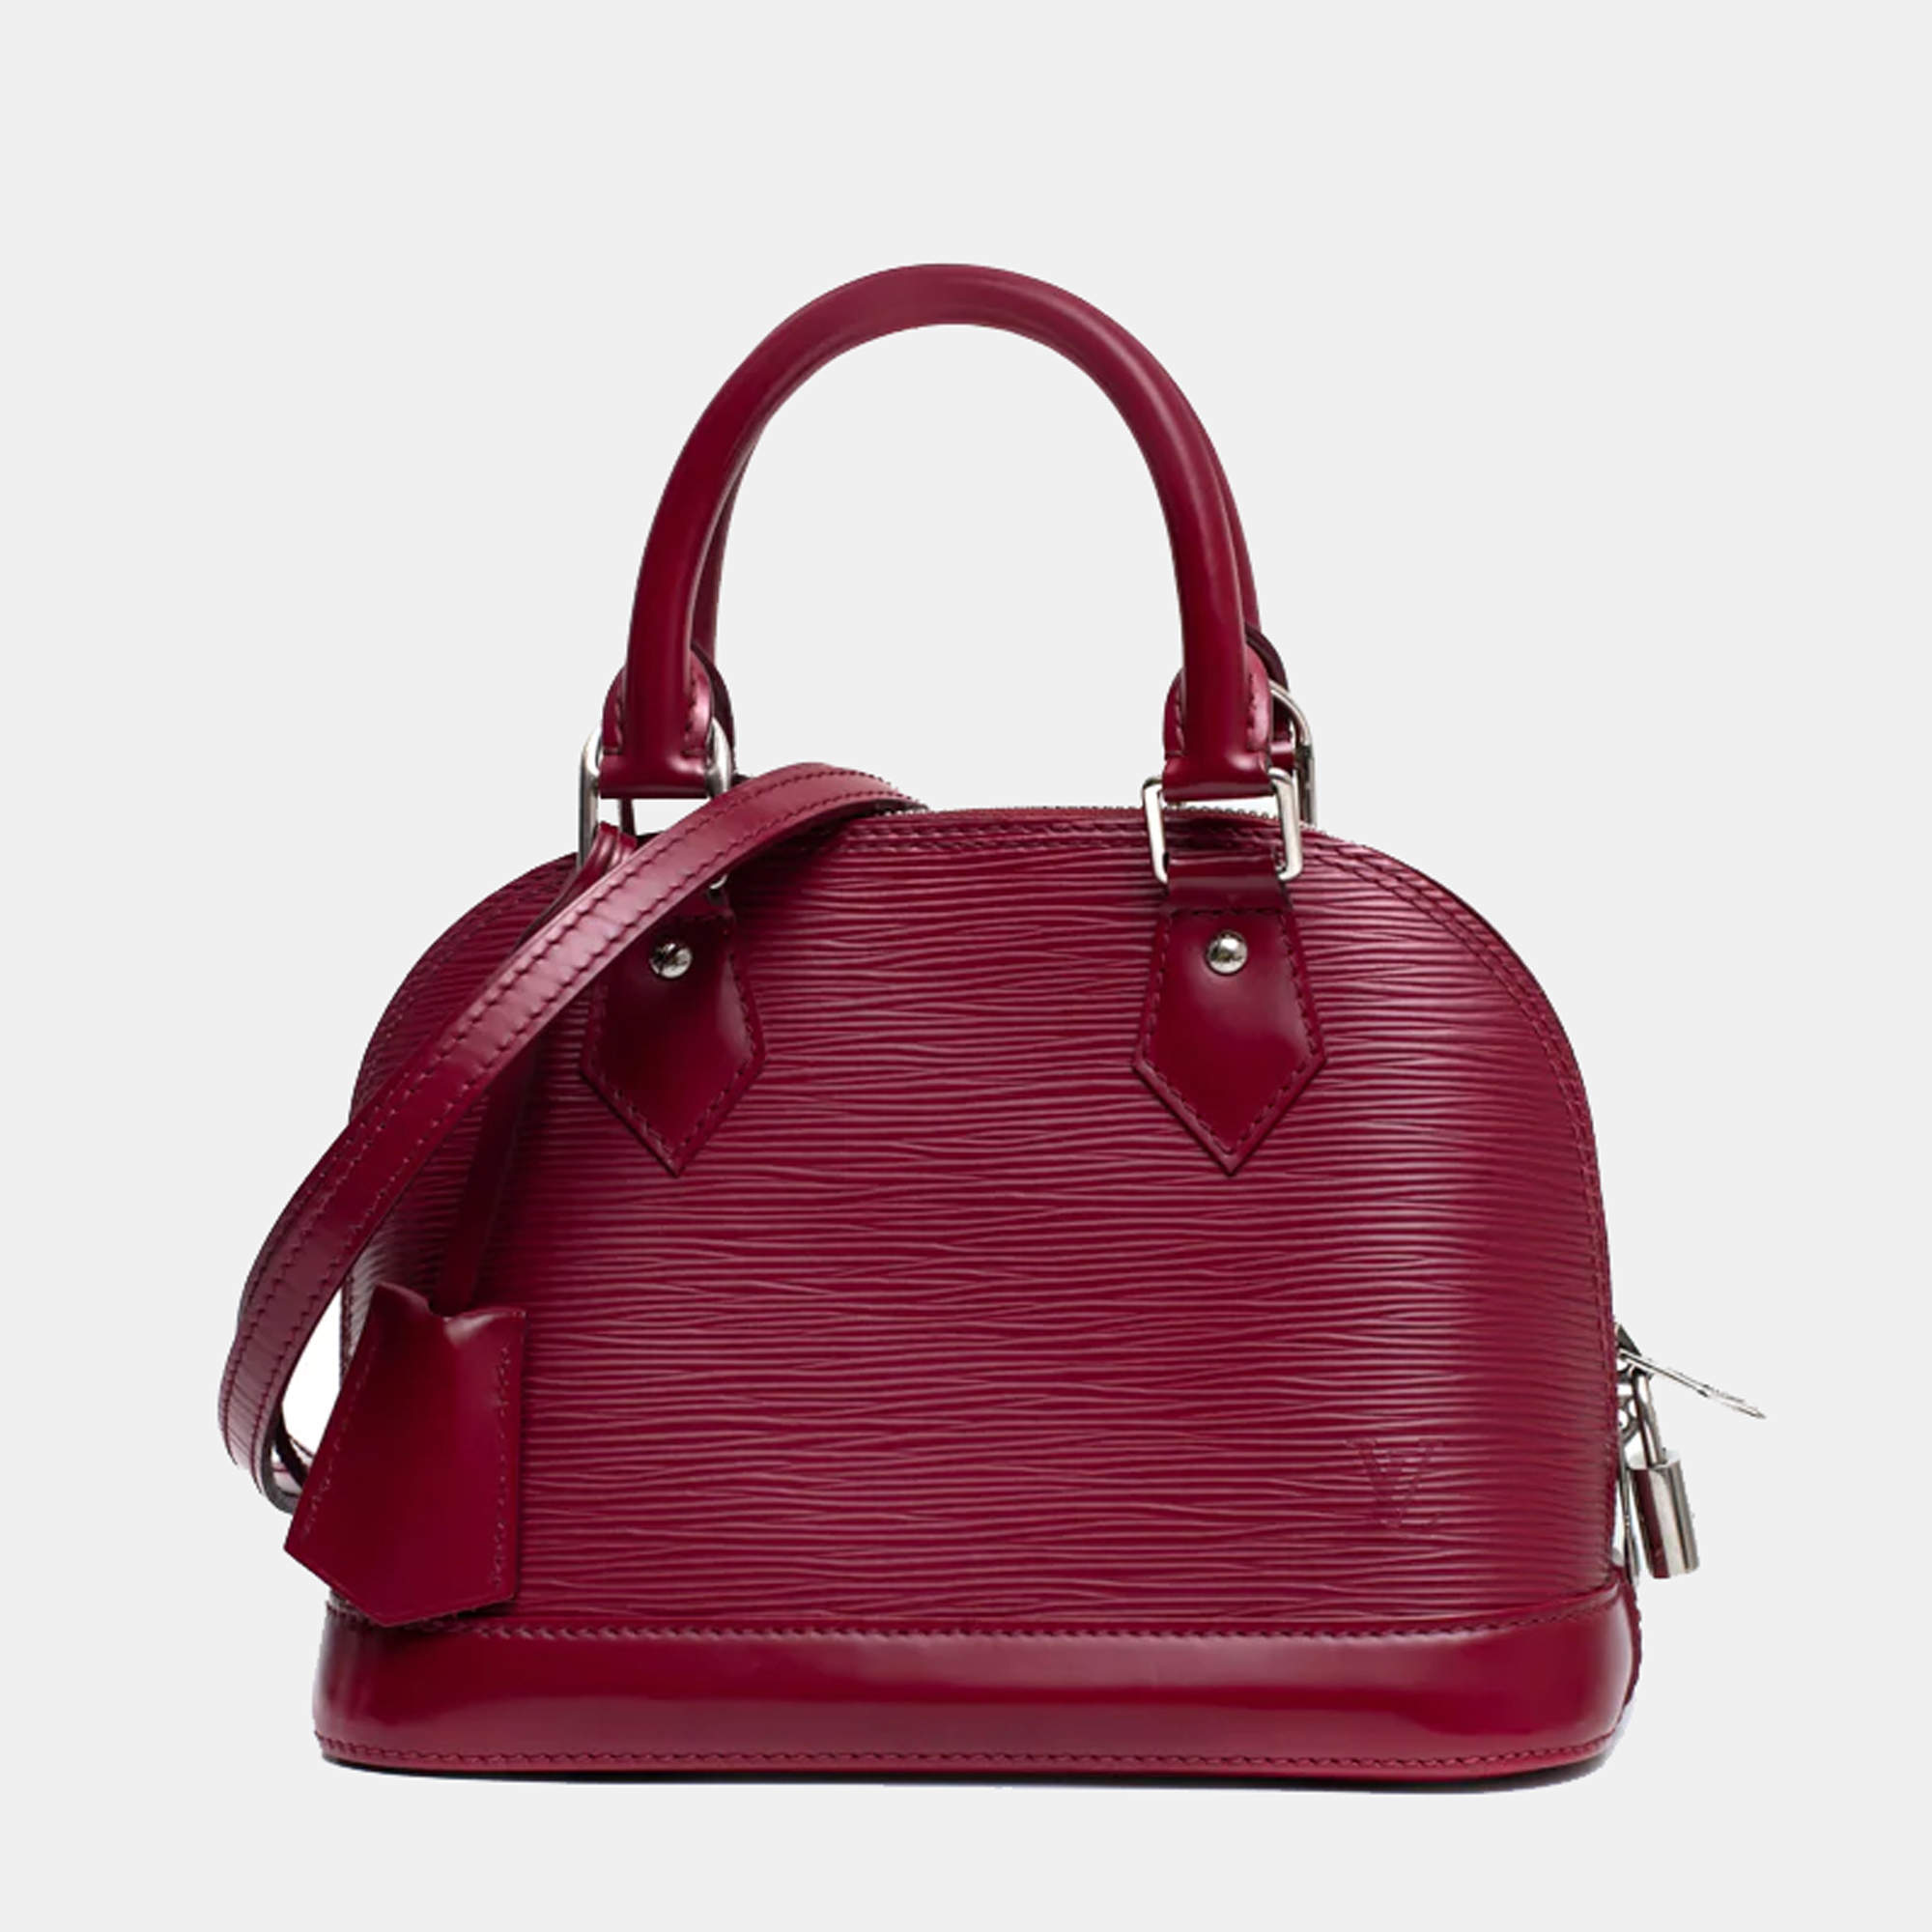 Louis Vuitton Purple Tote Bag For Sale at 1stDibs